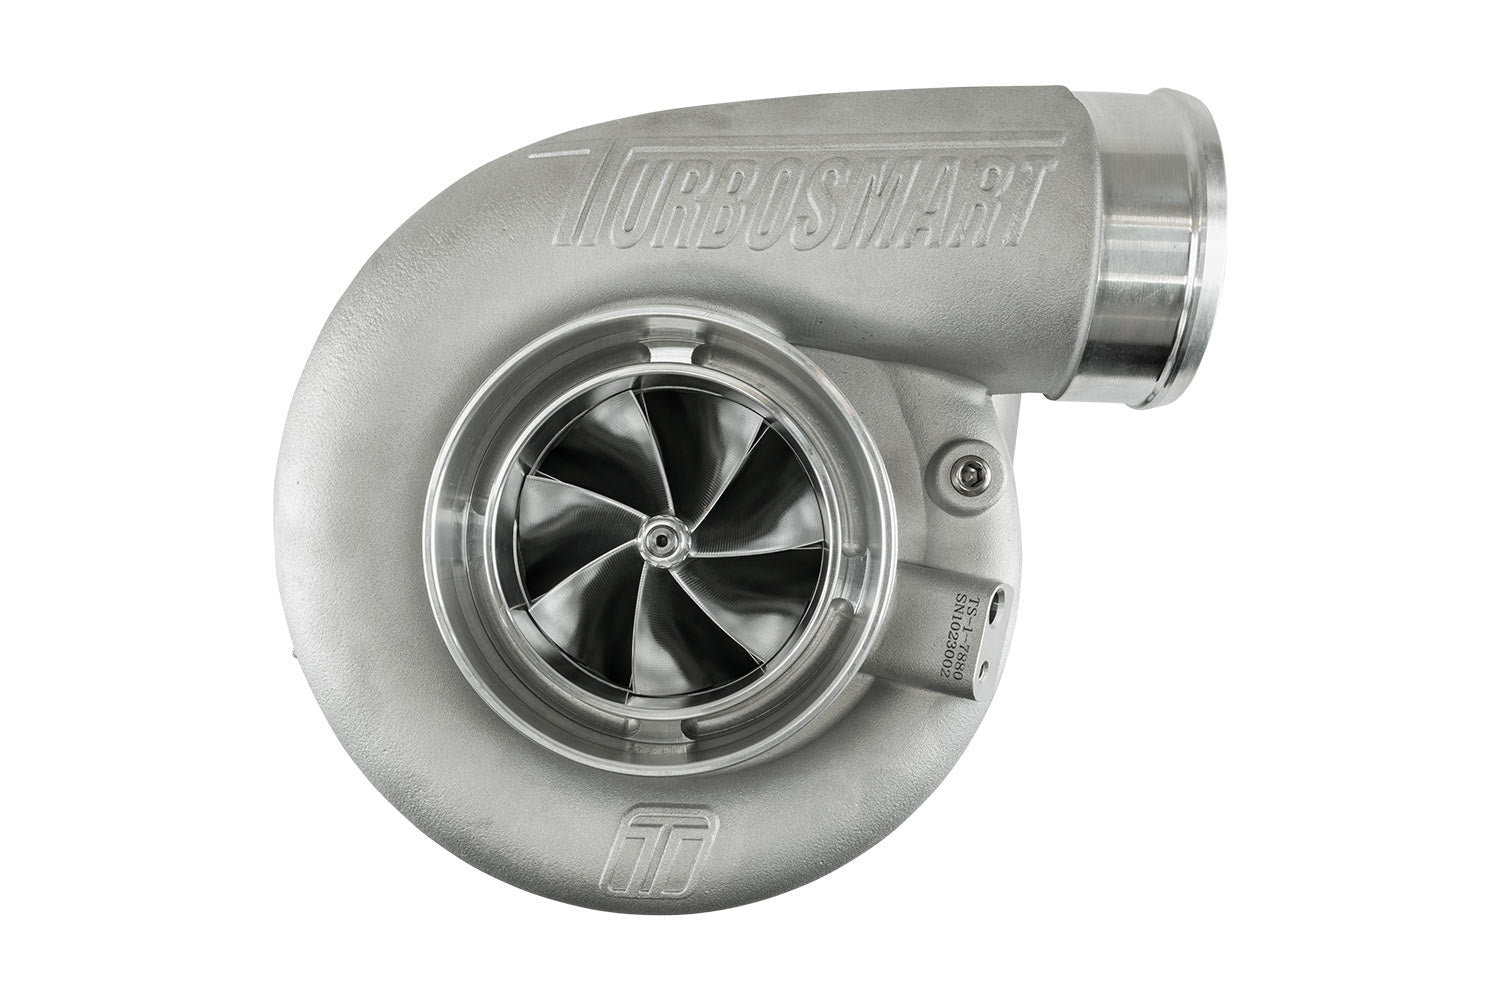 TS-2 Performance Turbocharger (Water Cooled) 6262 V-Band 0.82AR Externally Wastegated - 0